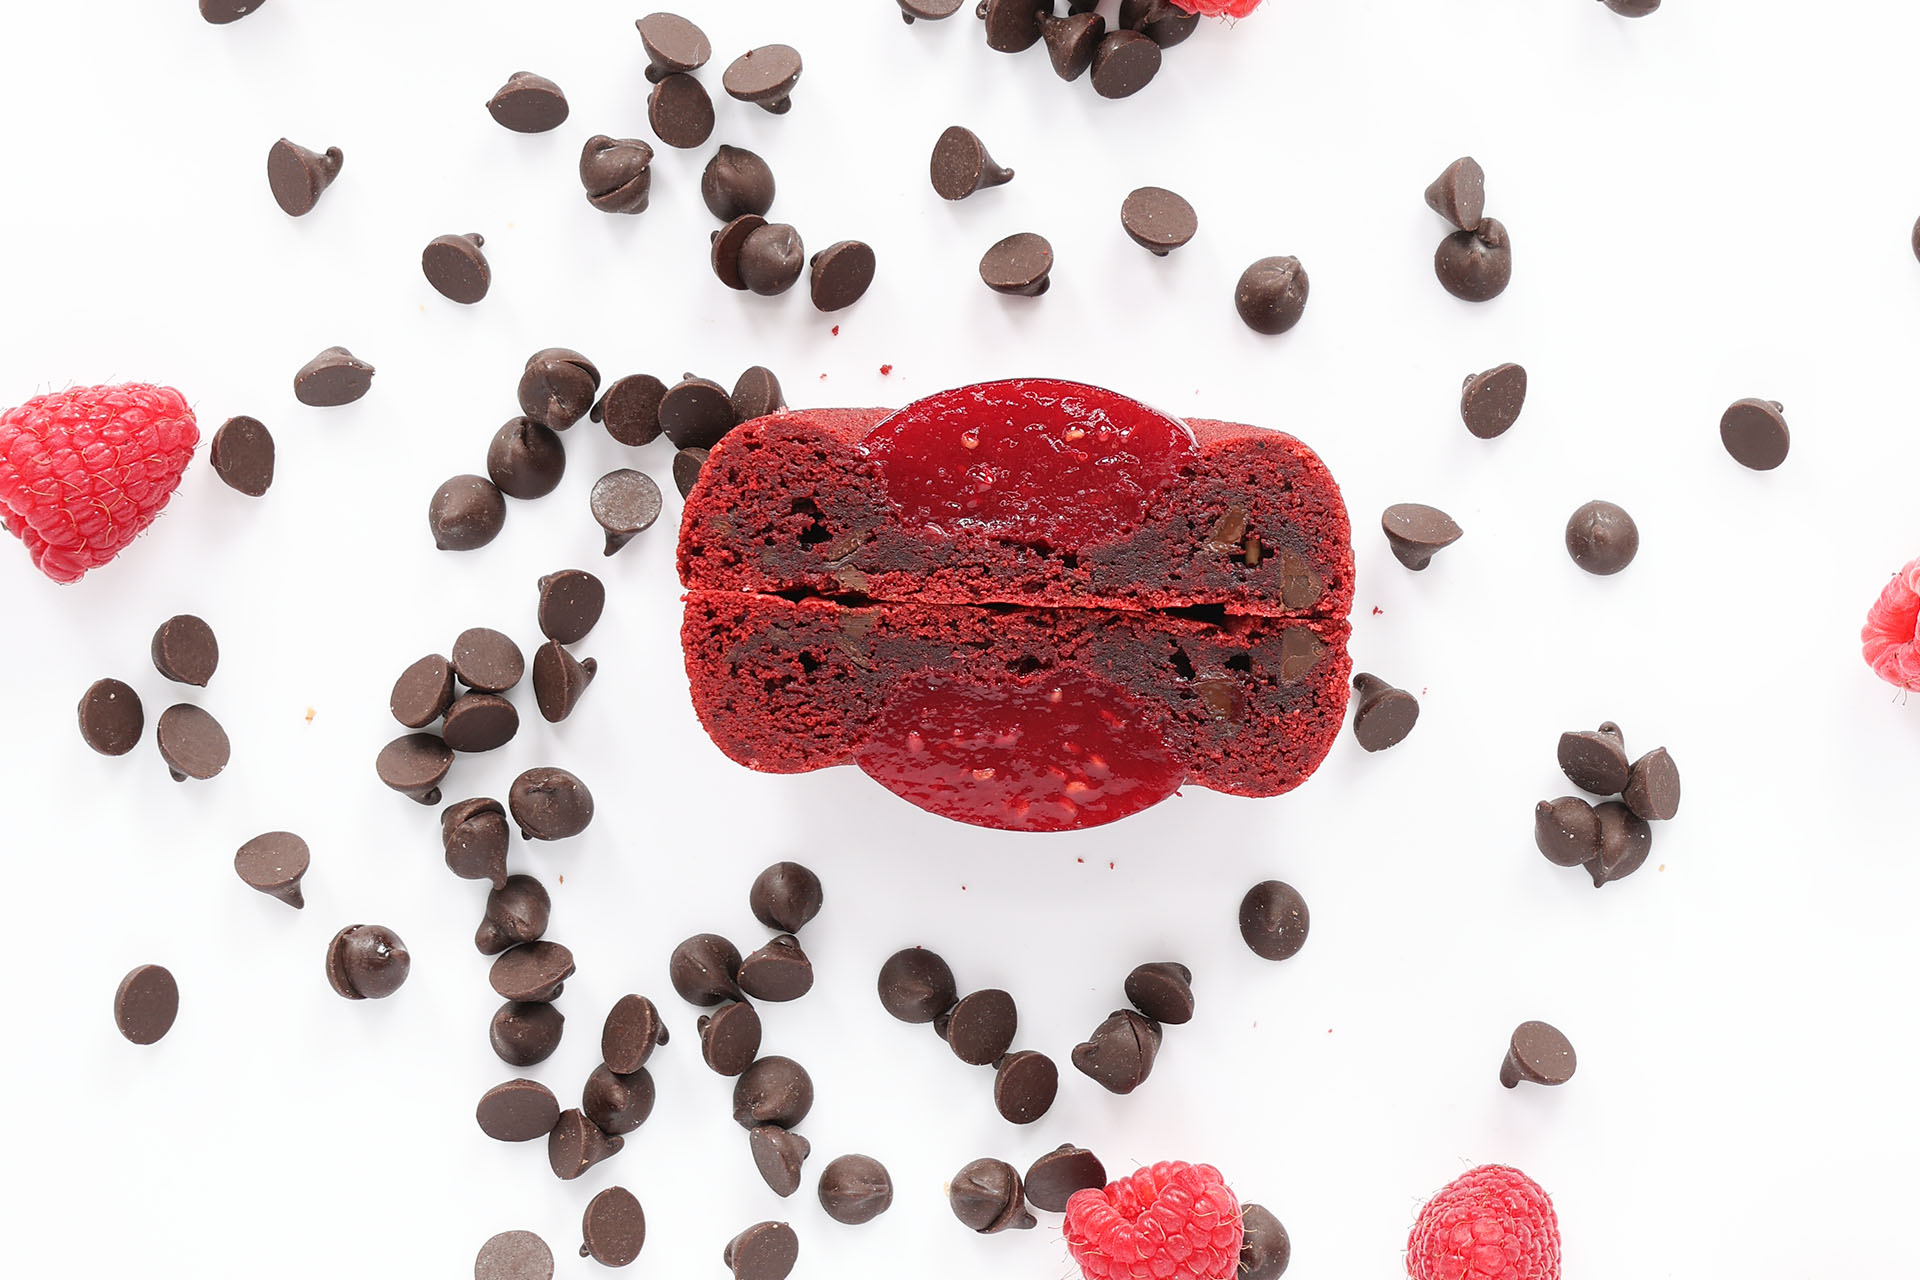 A red macaron with a chocolate and espresso filling, surrounded by scattered chocolate chips and raspberries on a white surface.